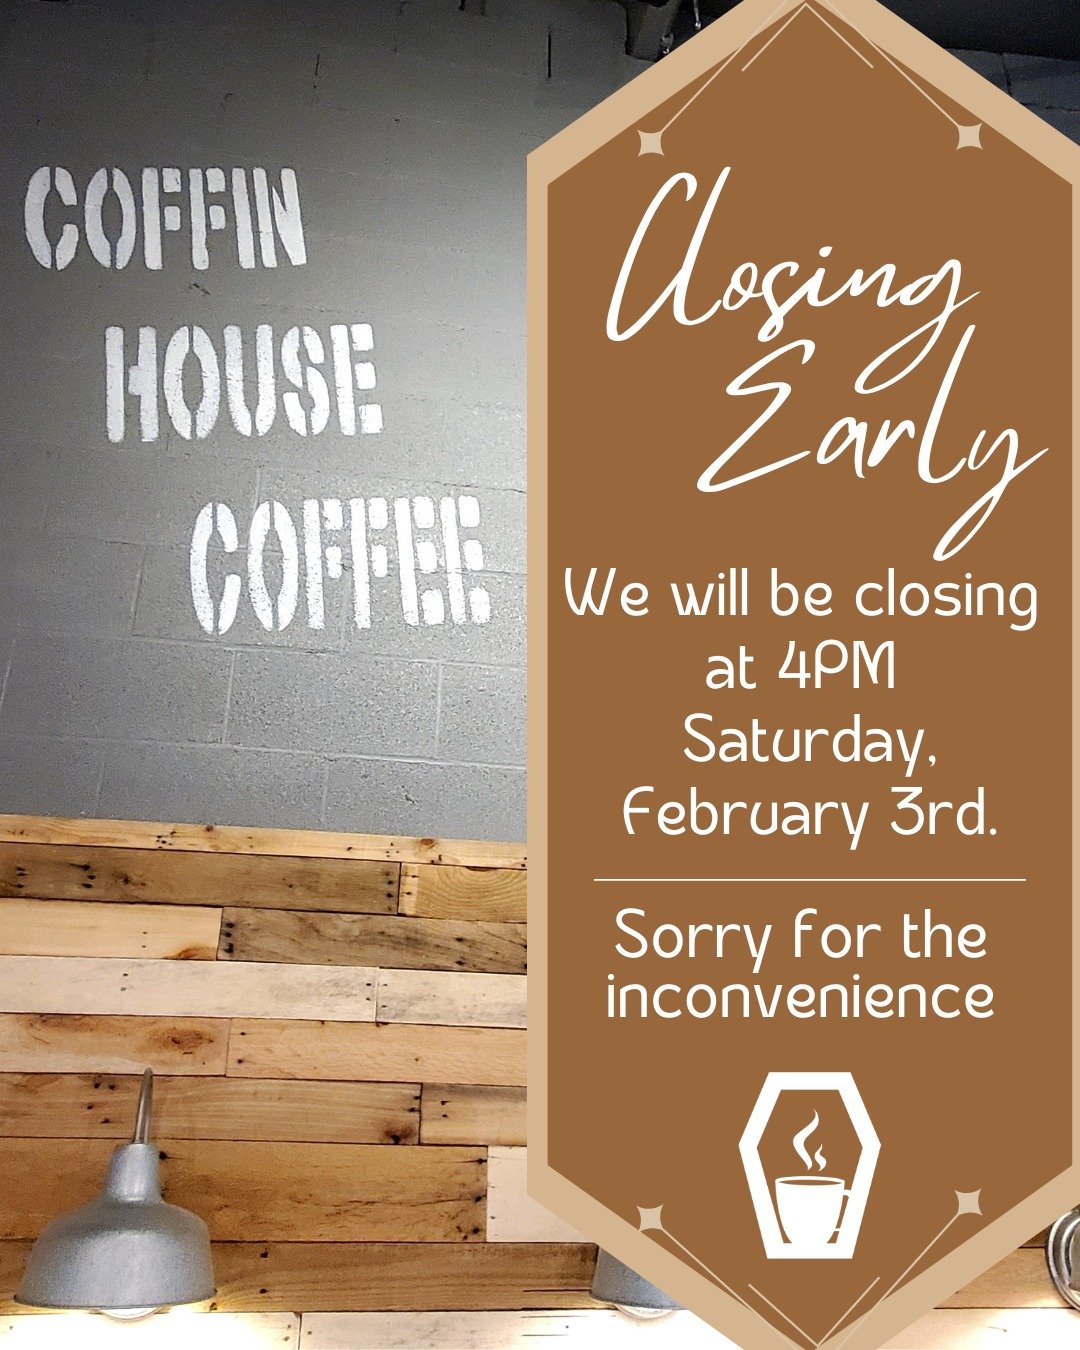 Happy Friday! We'll be closing early tomorrow Saturday, February 3rd at 4PM. Sorry for the inconvenience and thank you for understanding.
☕
On the bright side - we've got a whole new line of drinks for February and they're worth falling in LOVE for! 